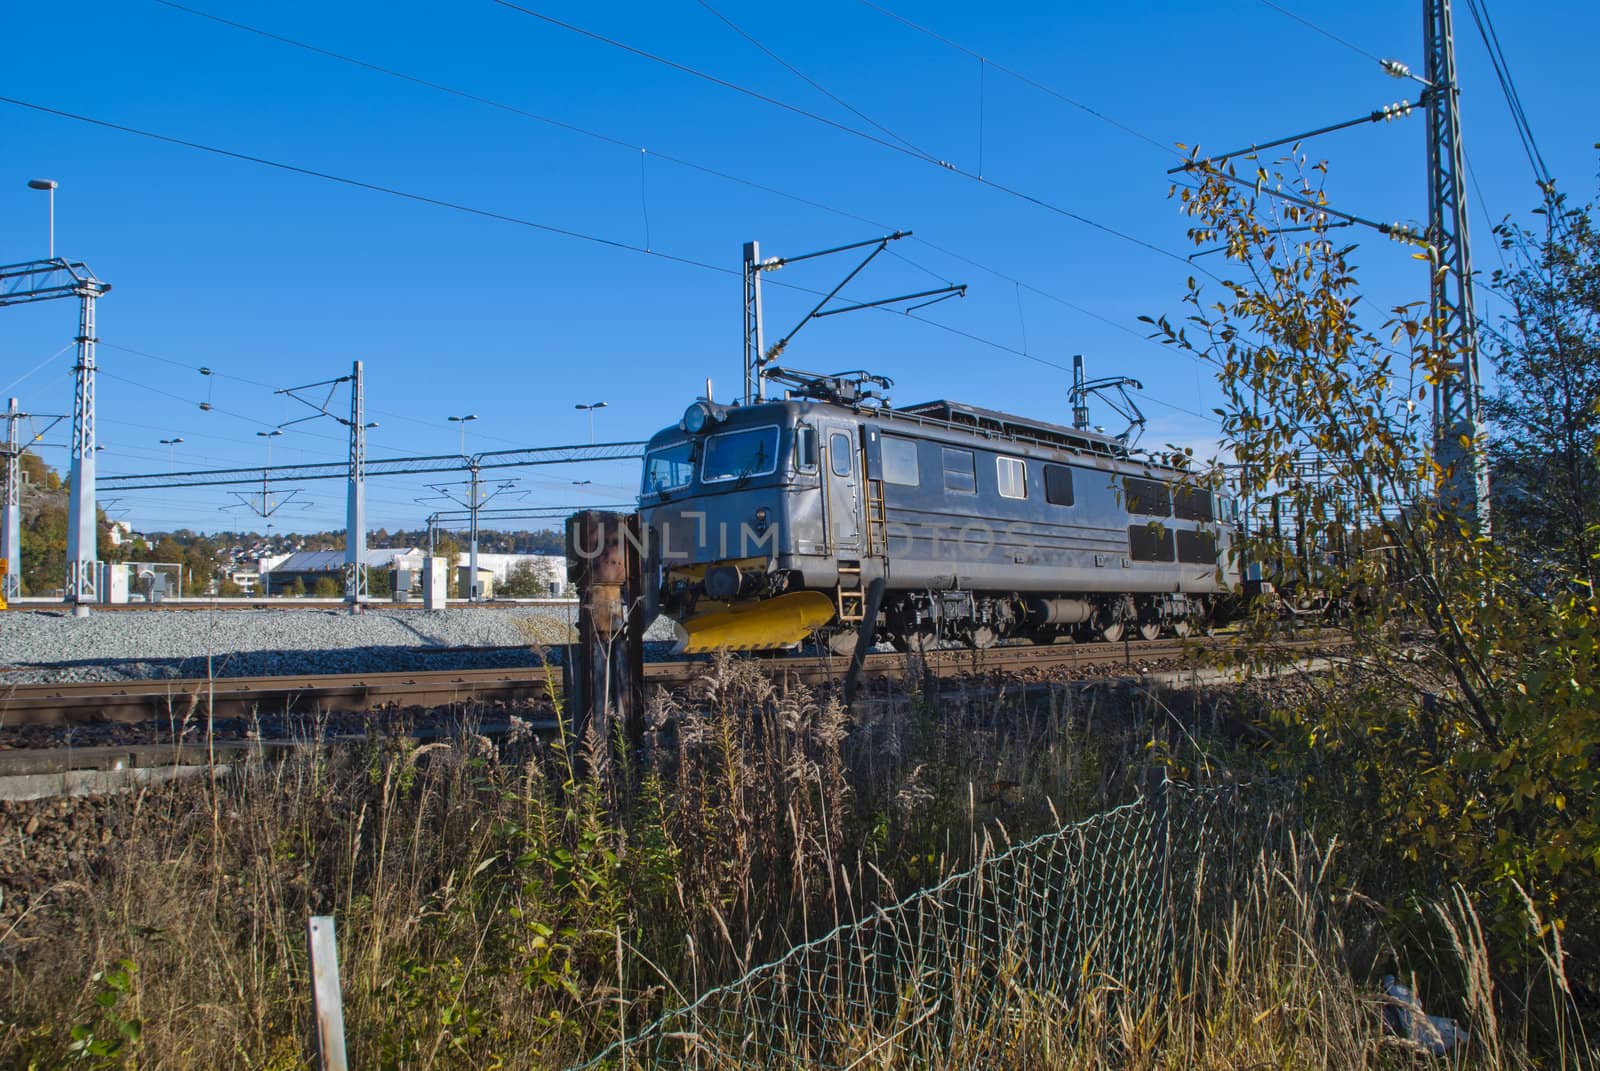 El. 14 is an electric locomotive that is now used by CargoNet to pull freight trains in Norway. El 14 has also gone in person traffic at NSB, but as of today are all locomotives used by CargoNet. Picture is shot just off Halden railway station.